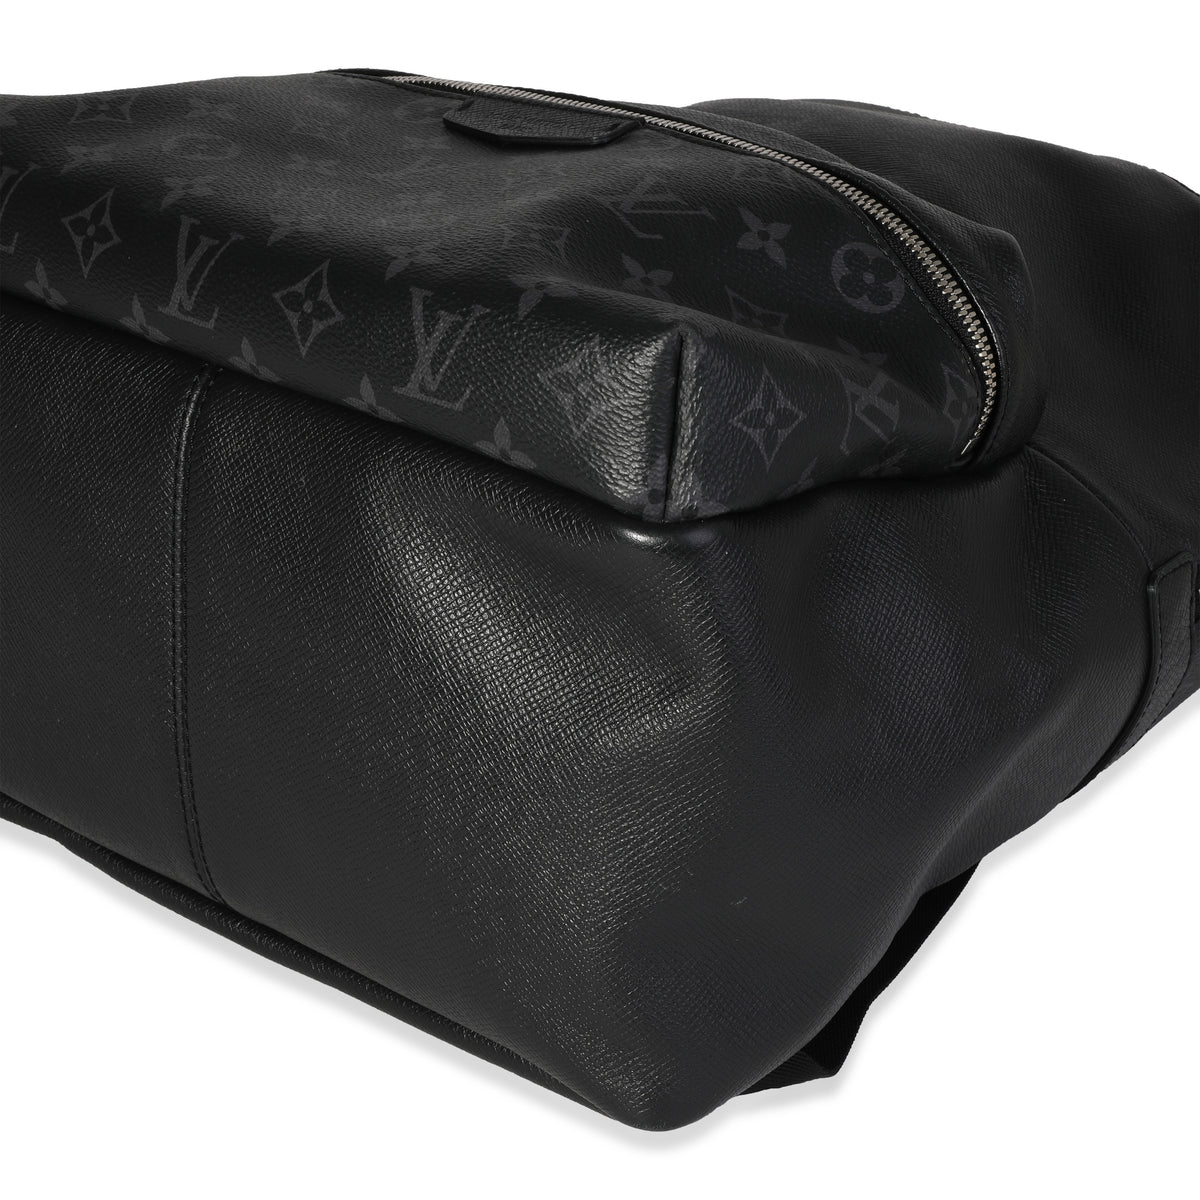 Louis Vuitton Discovery Monogram Eclipse Taiga Backpack